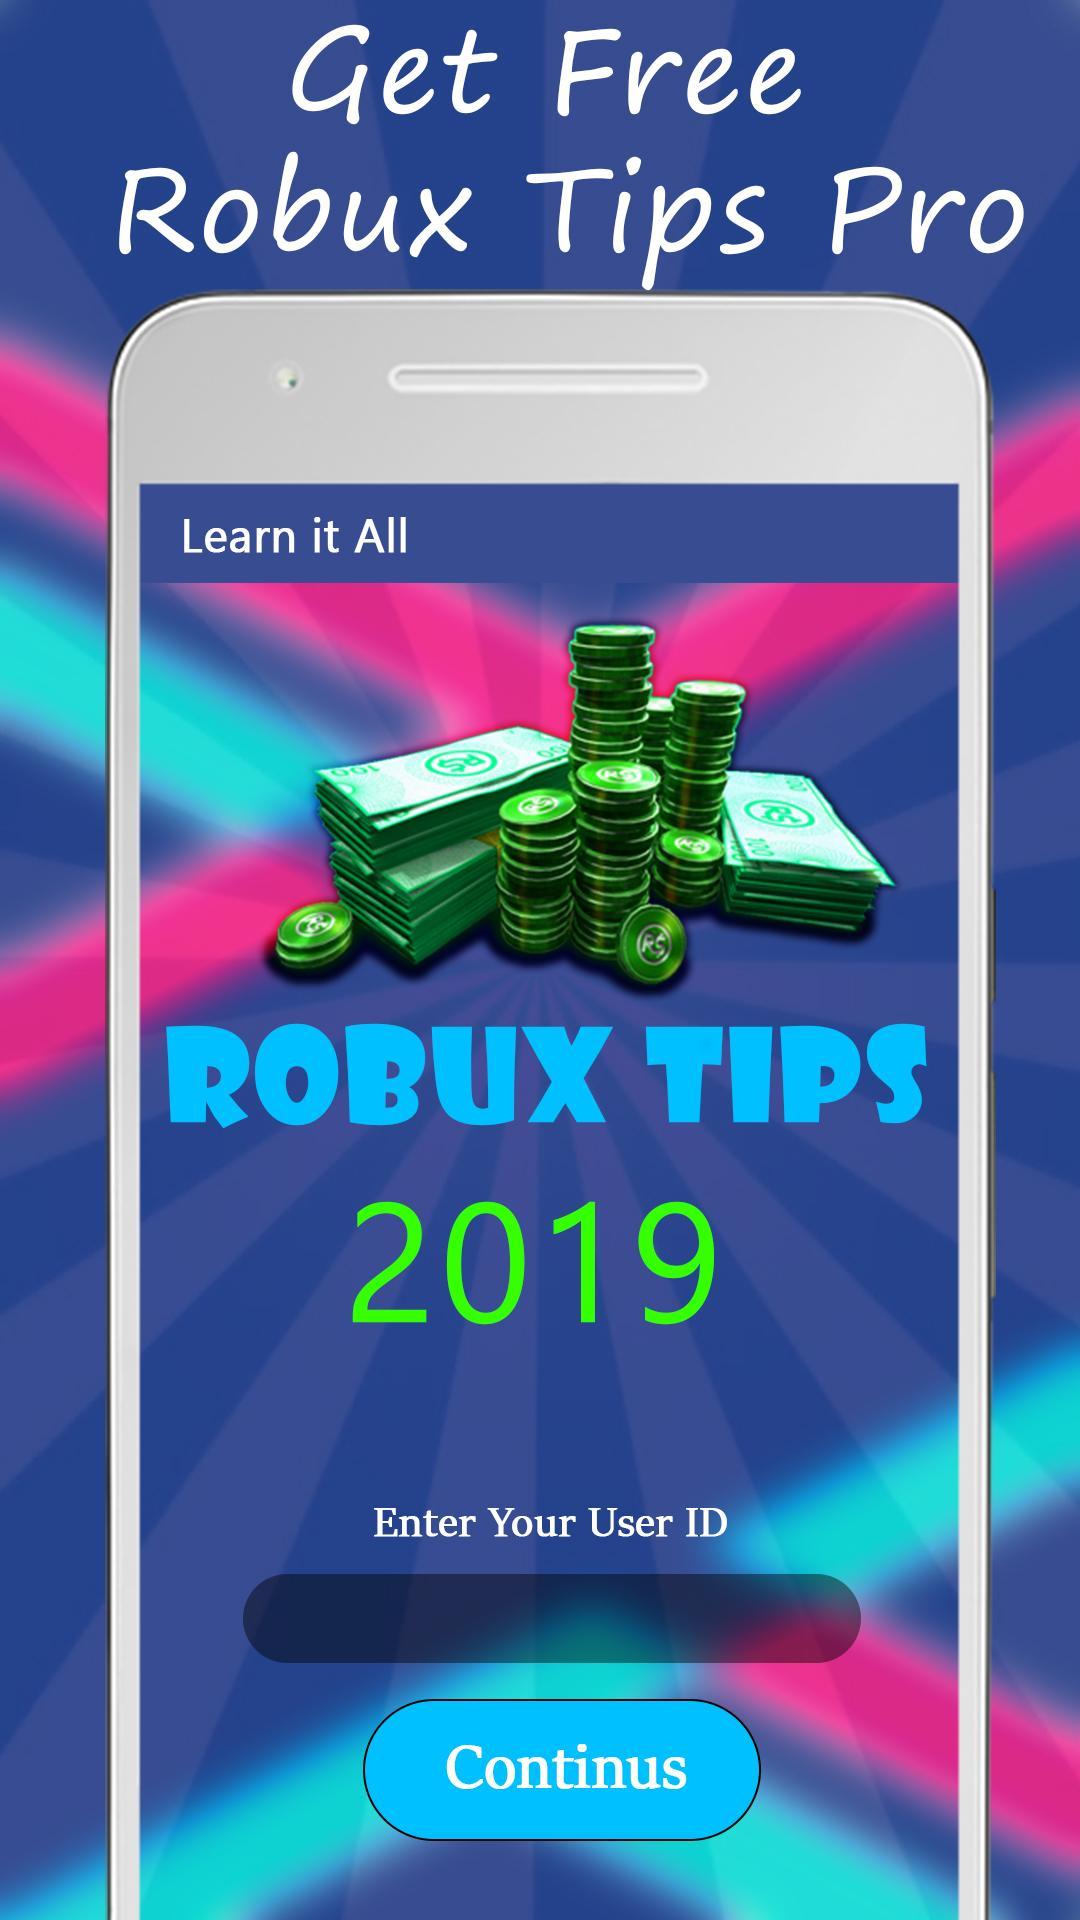 Get New Free Tips Robux For Roblox Guide 2k19 For Android Apk - new roblox 2 robux game guide for android apk download